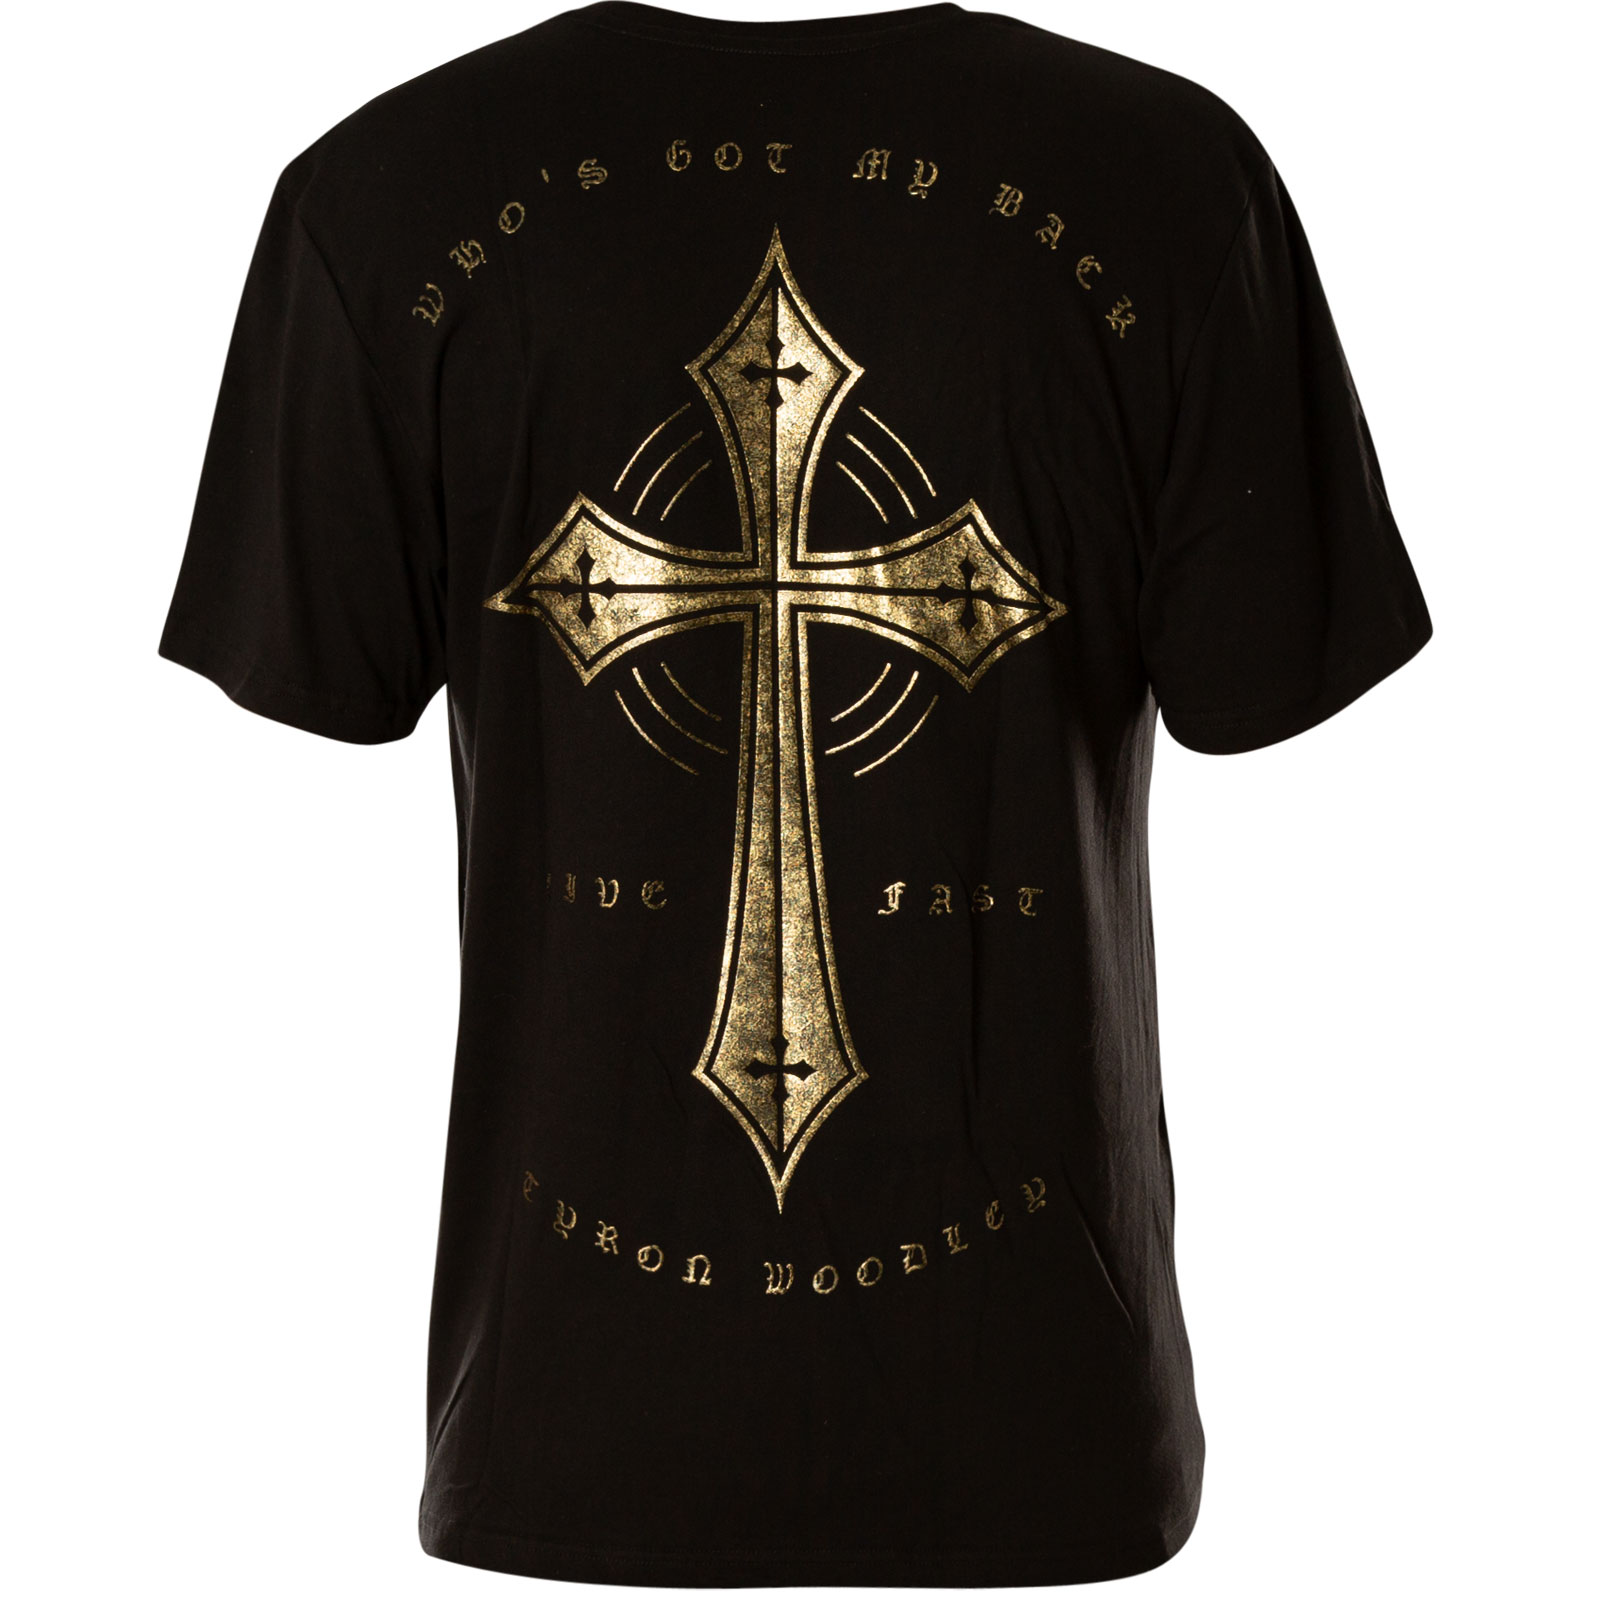 Affliction The One Print of a cross with lettering